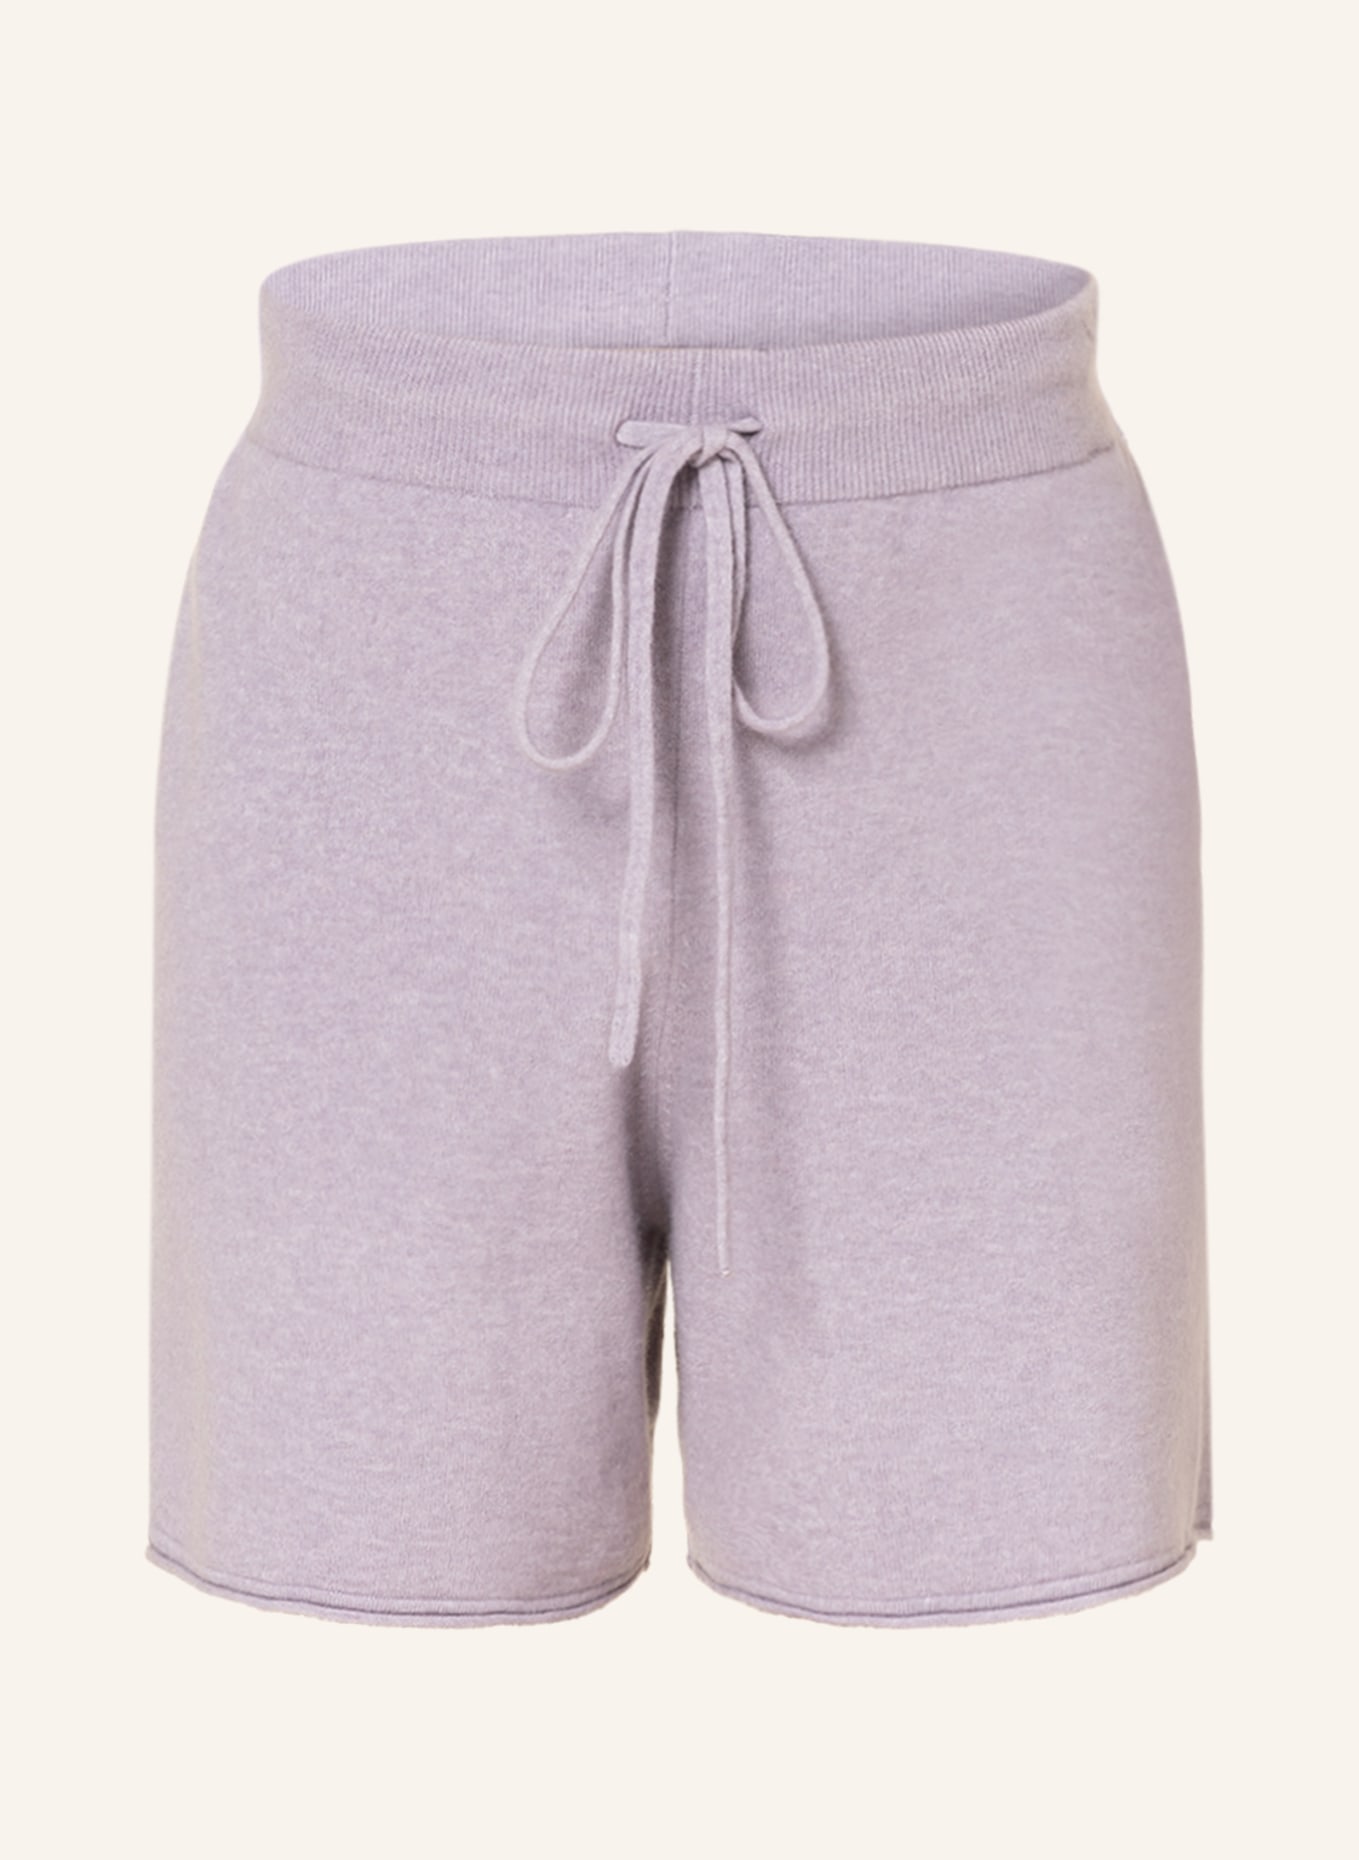 (THE MERCER) N.Y. Knit shorts with merino wool, Color: LIGHT PURPLE (Image 1)